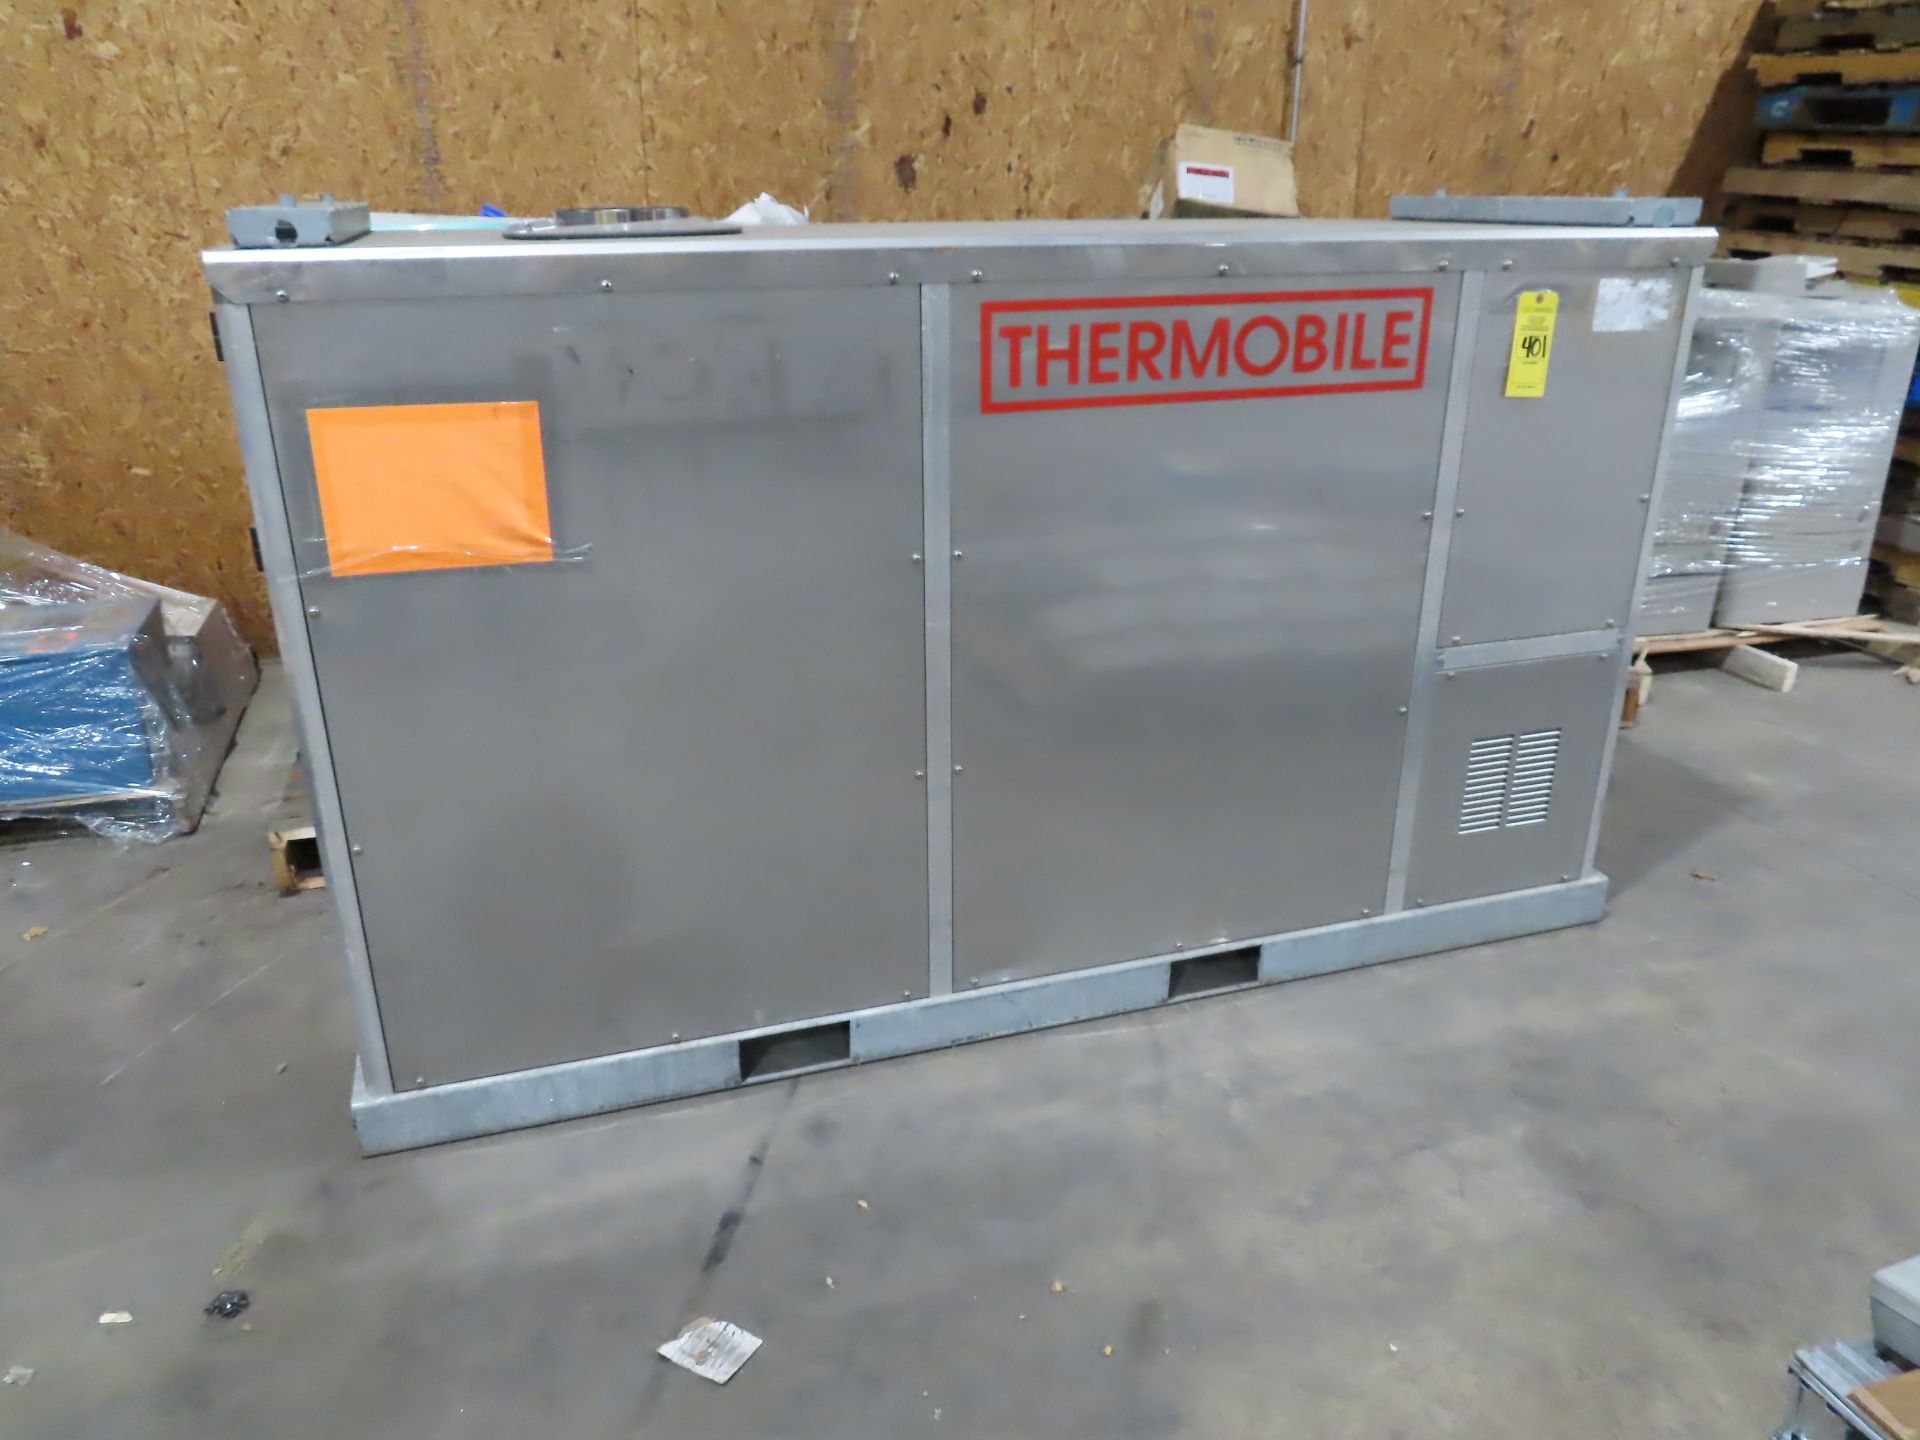 Thermobile Model IMAC-2000SG construction heater, 650,000btu, new old stock with zero hours, as